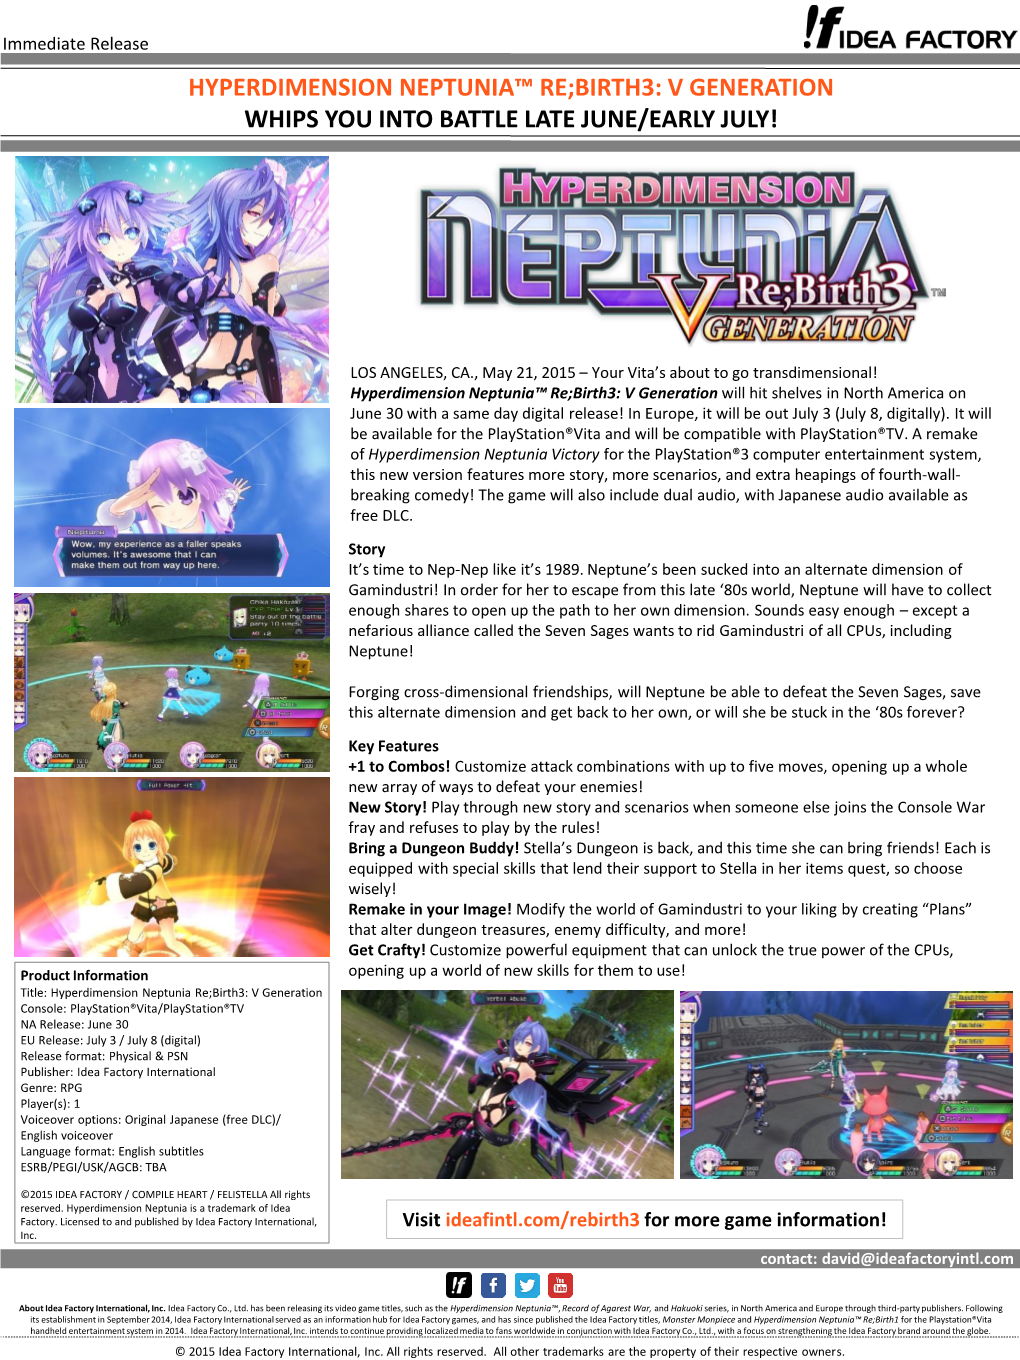 Hyperdimension Neptunia™ Re;Birth3: V Generation Whips You Into Battle Late June/Early July!